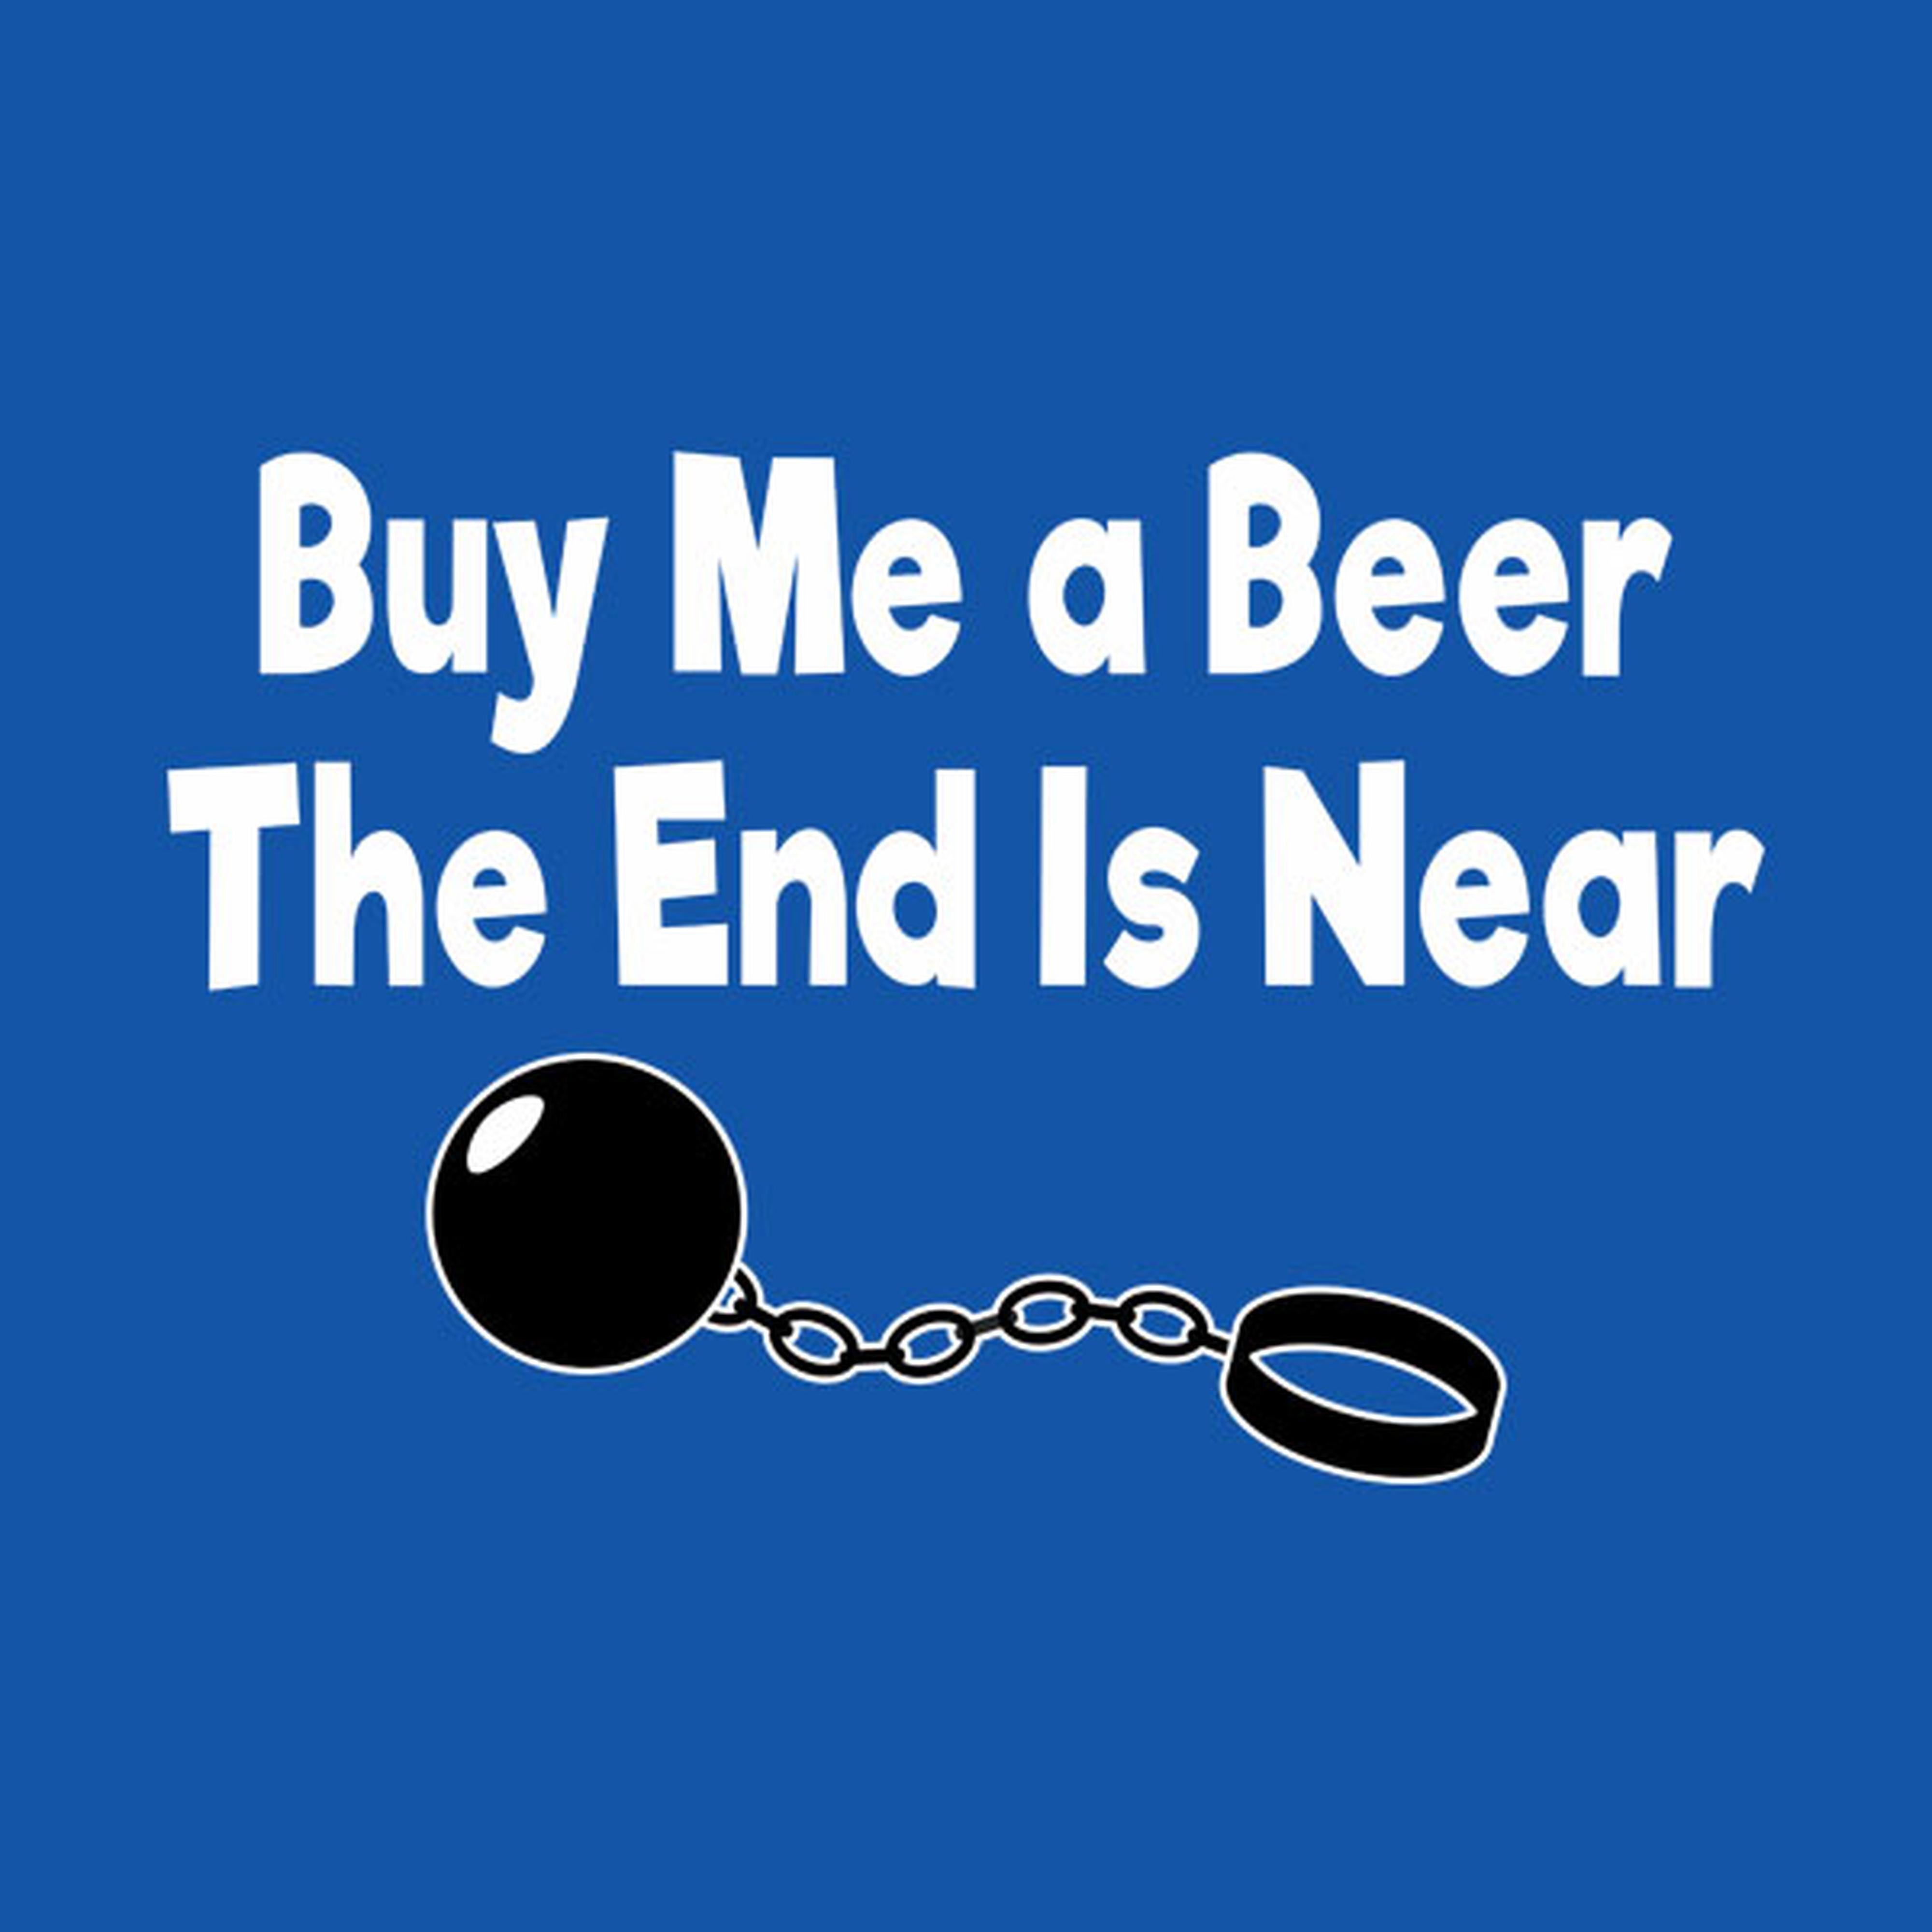 Buy me a beer, the end is near - T-shirt